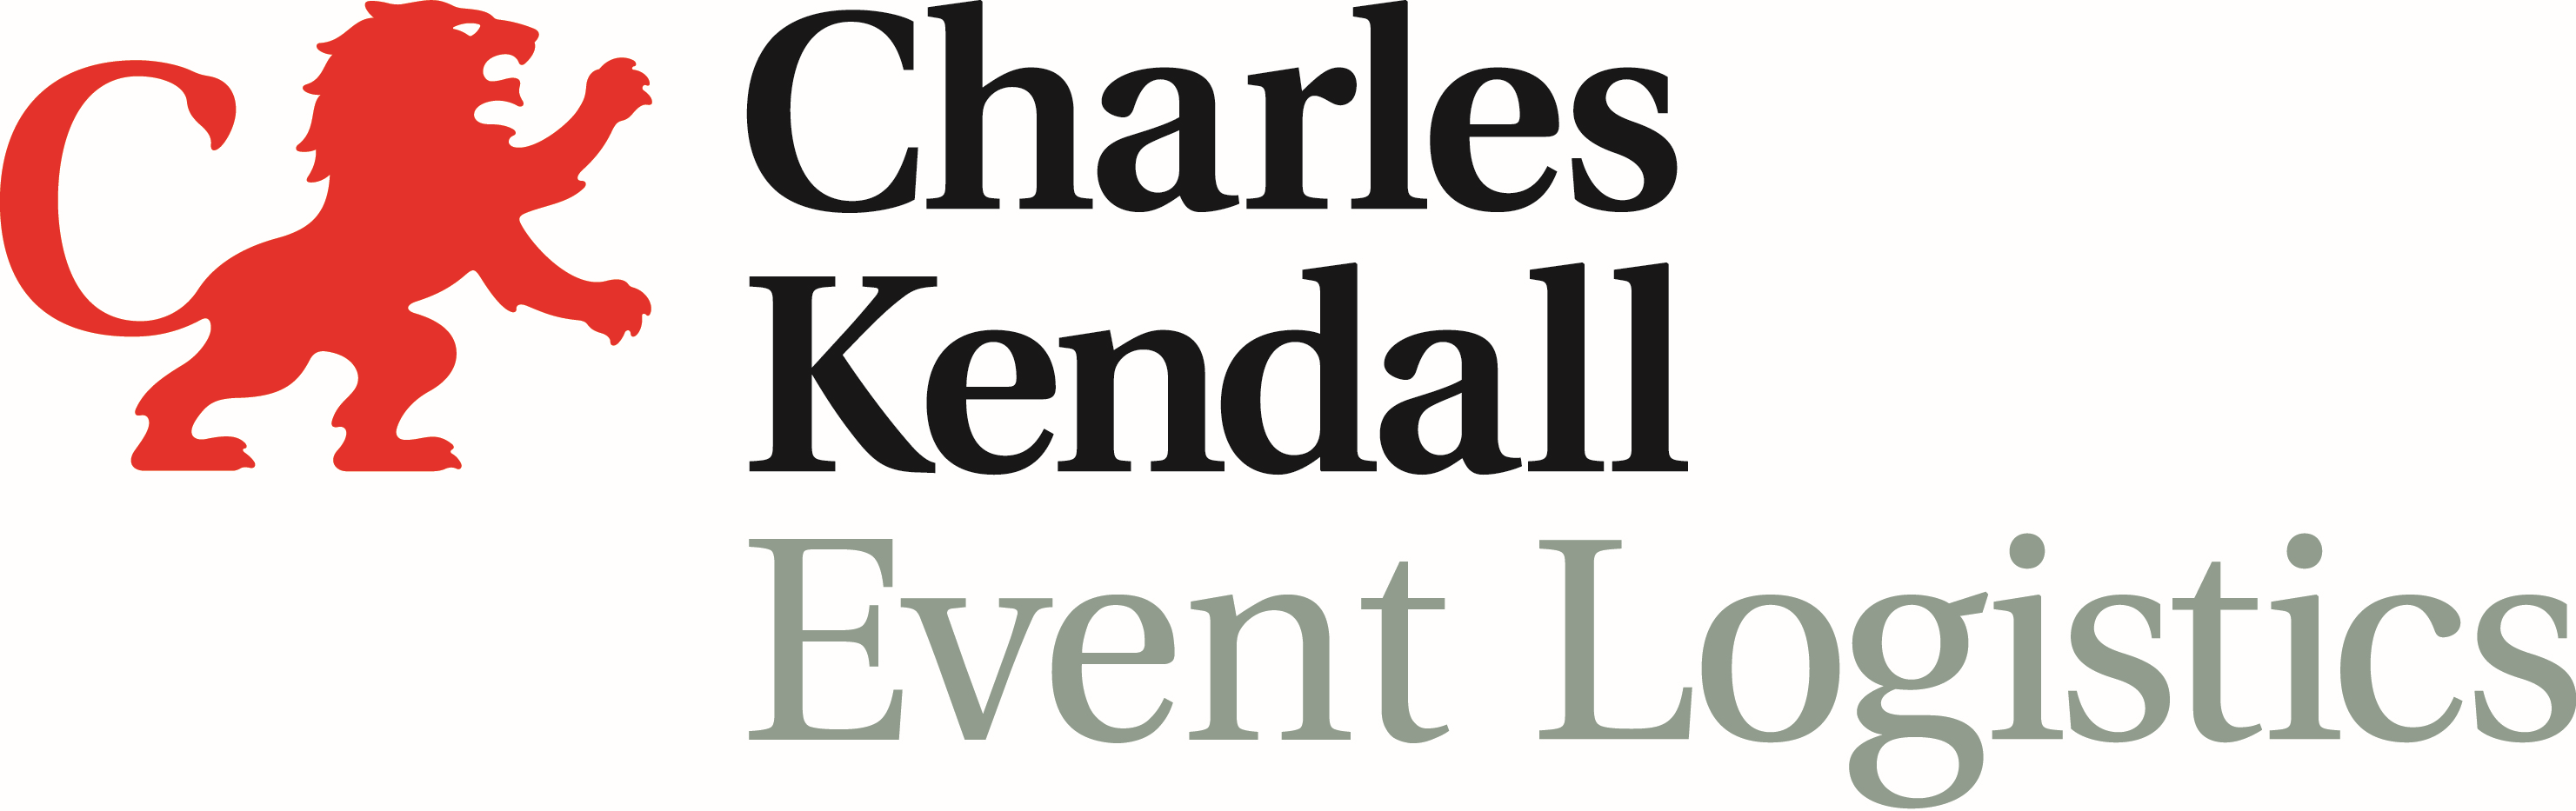 Charles Kendall Biologistics exhibition freighting